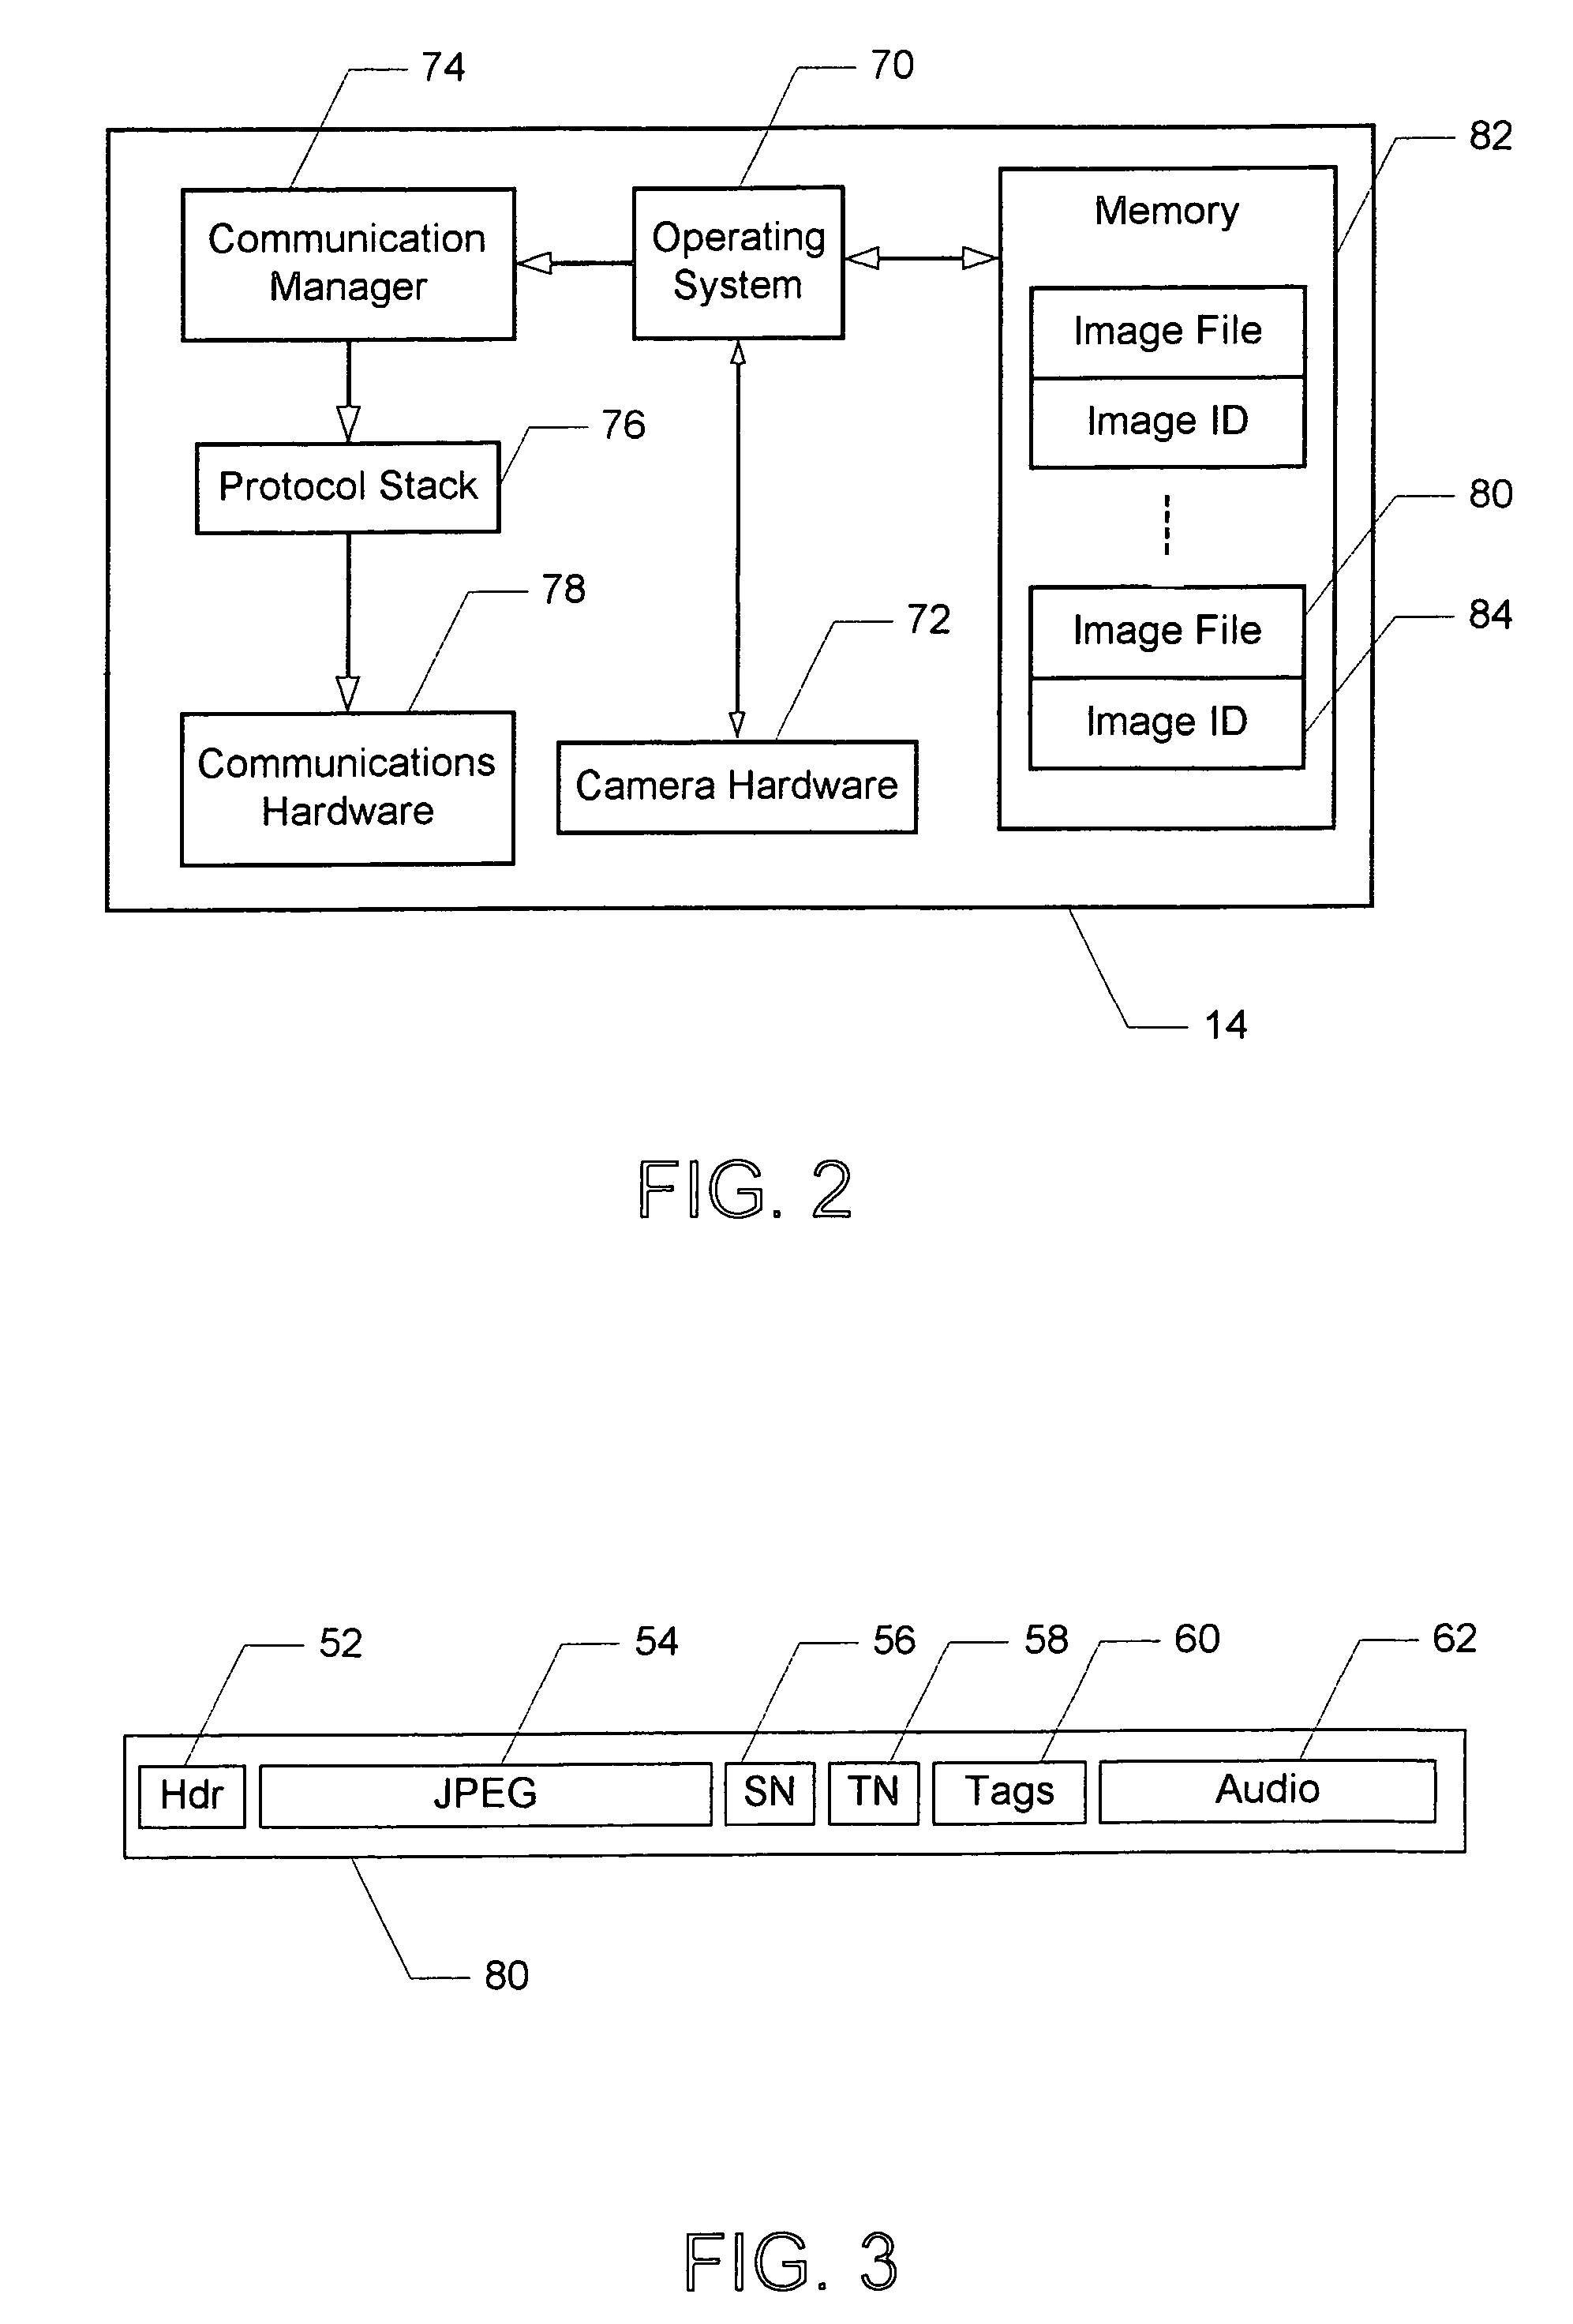 Transmission bandwidth and memory requirements reduction in a portable image capture device by eliminating duplicate image transmissions